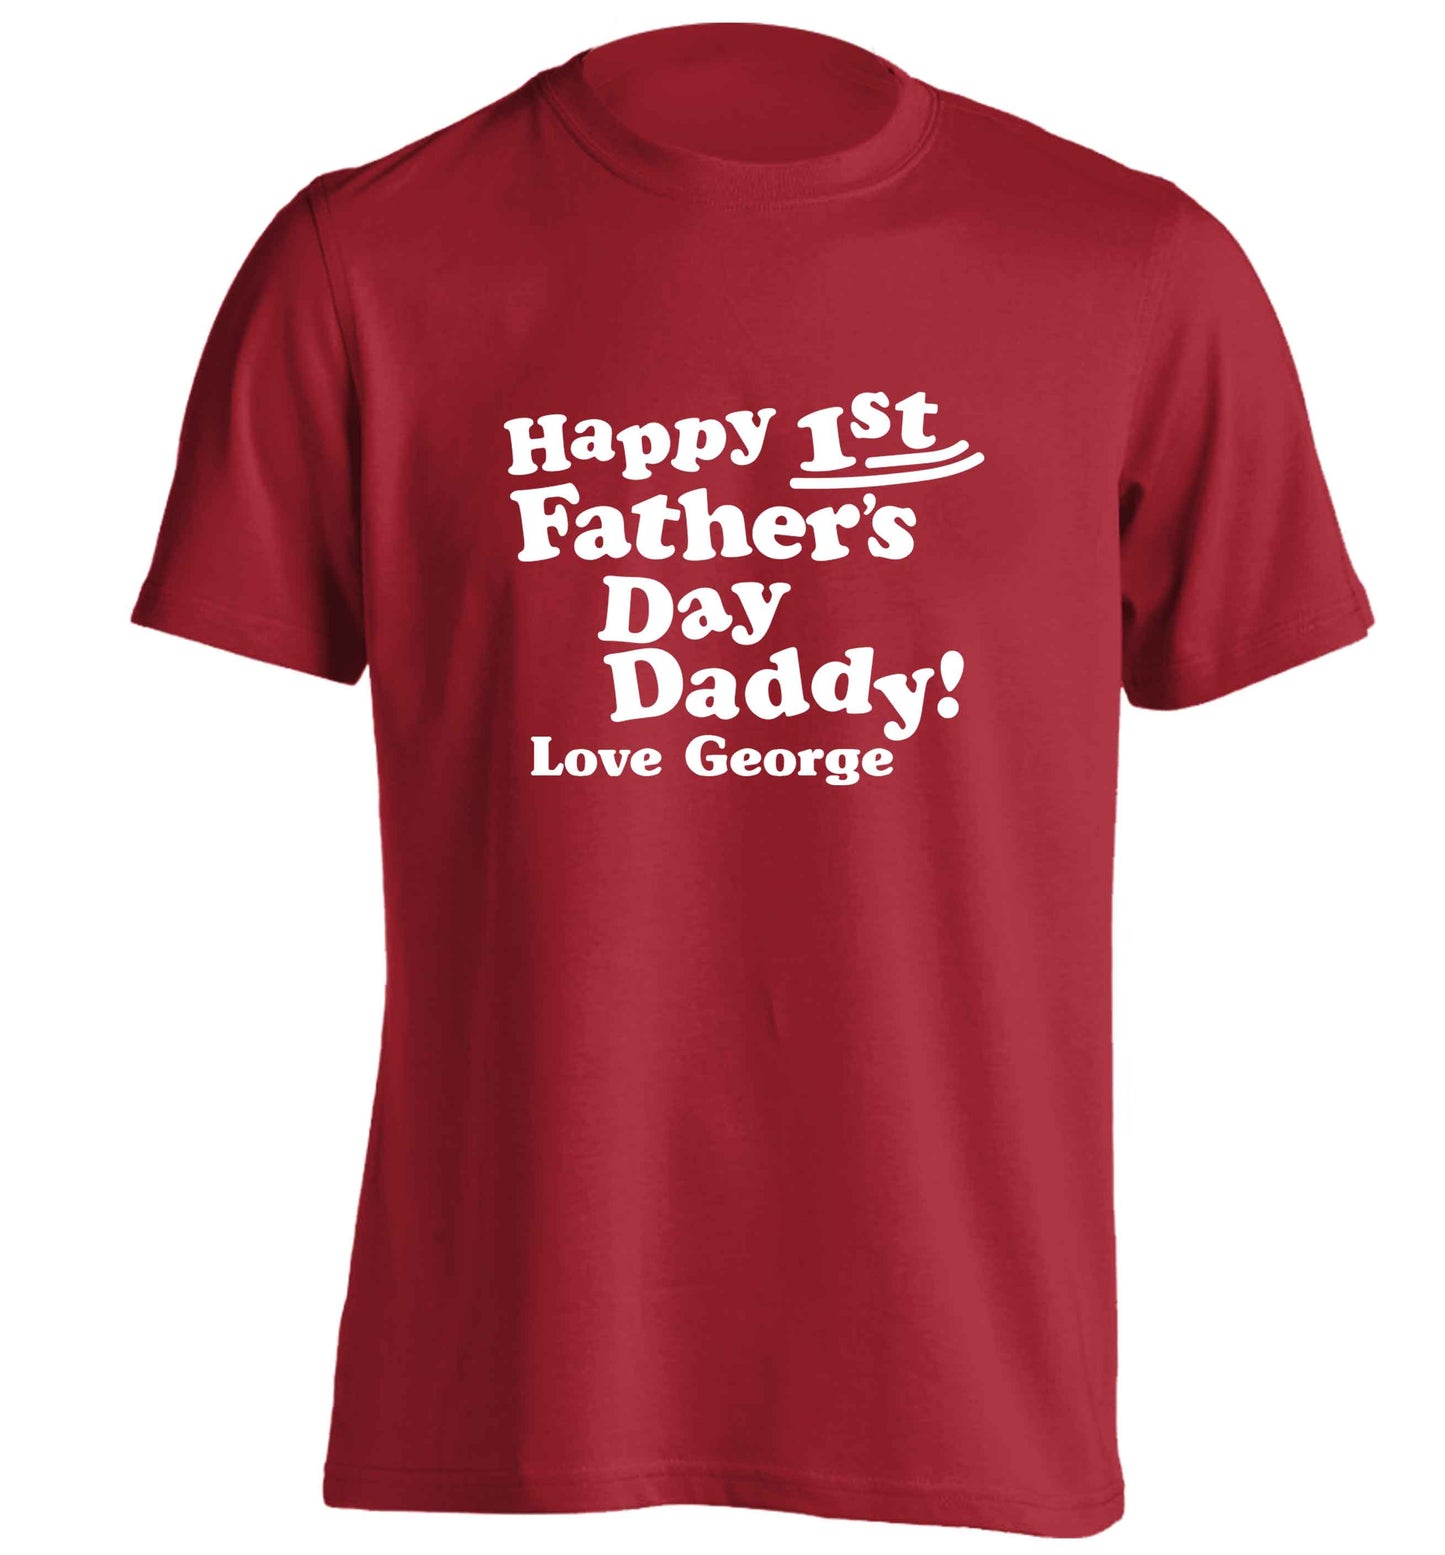 Happy first Fathers Day daddy love personalised adults unisex red Tshirt 2XL